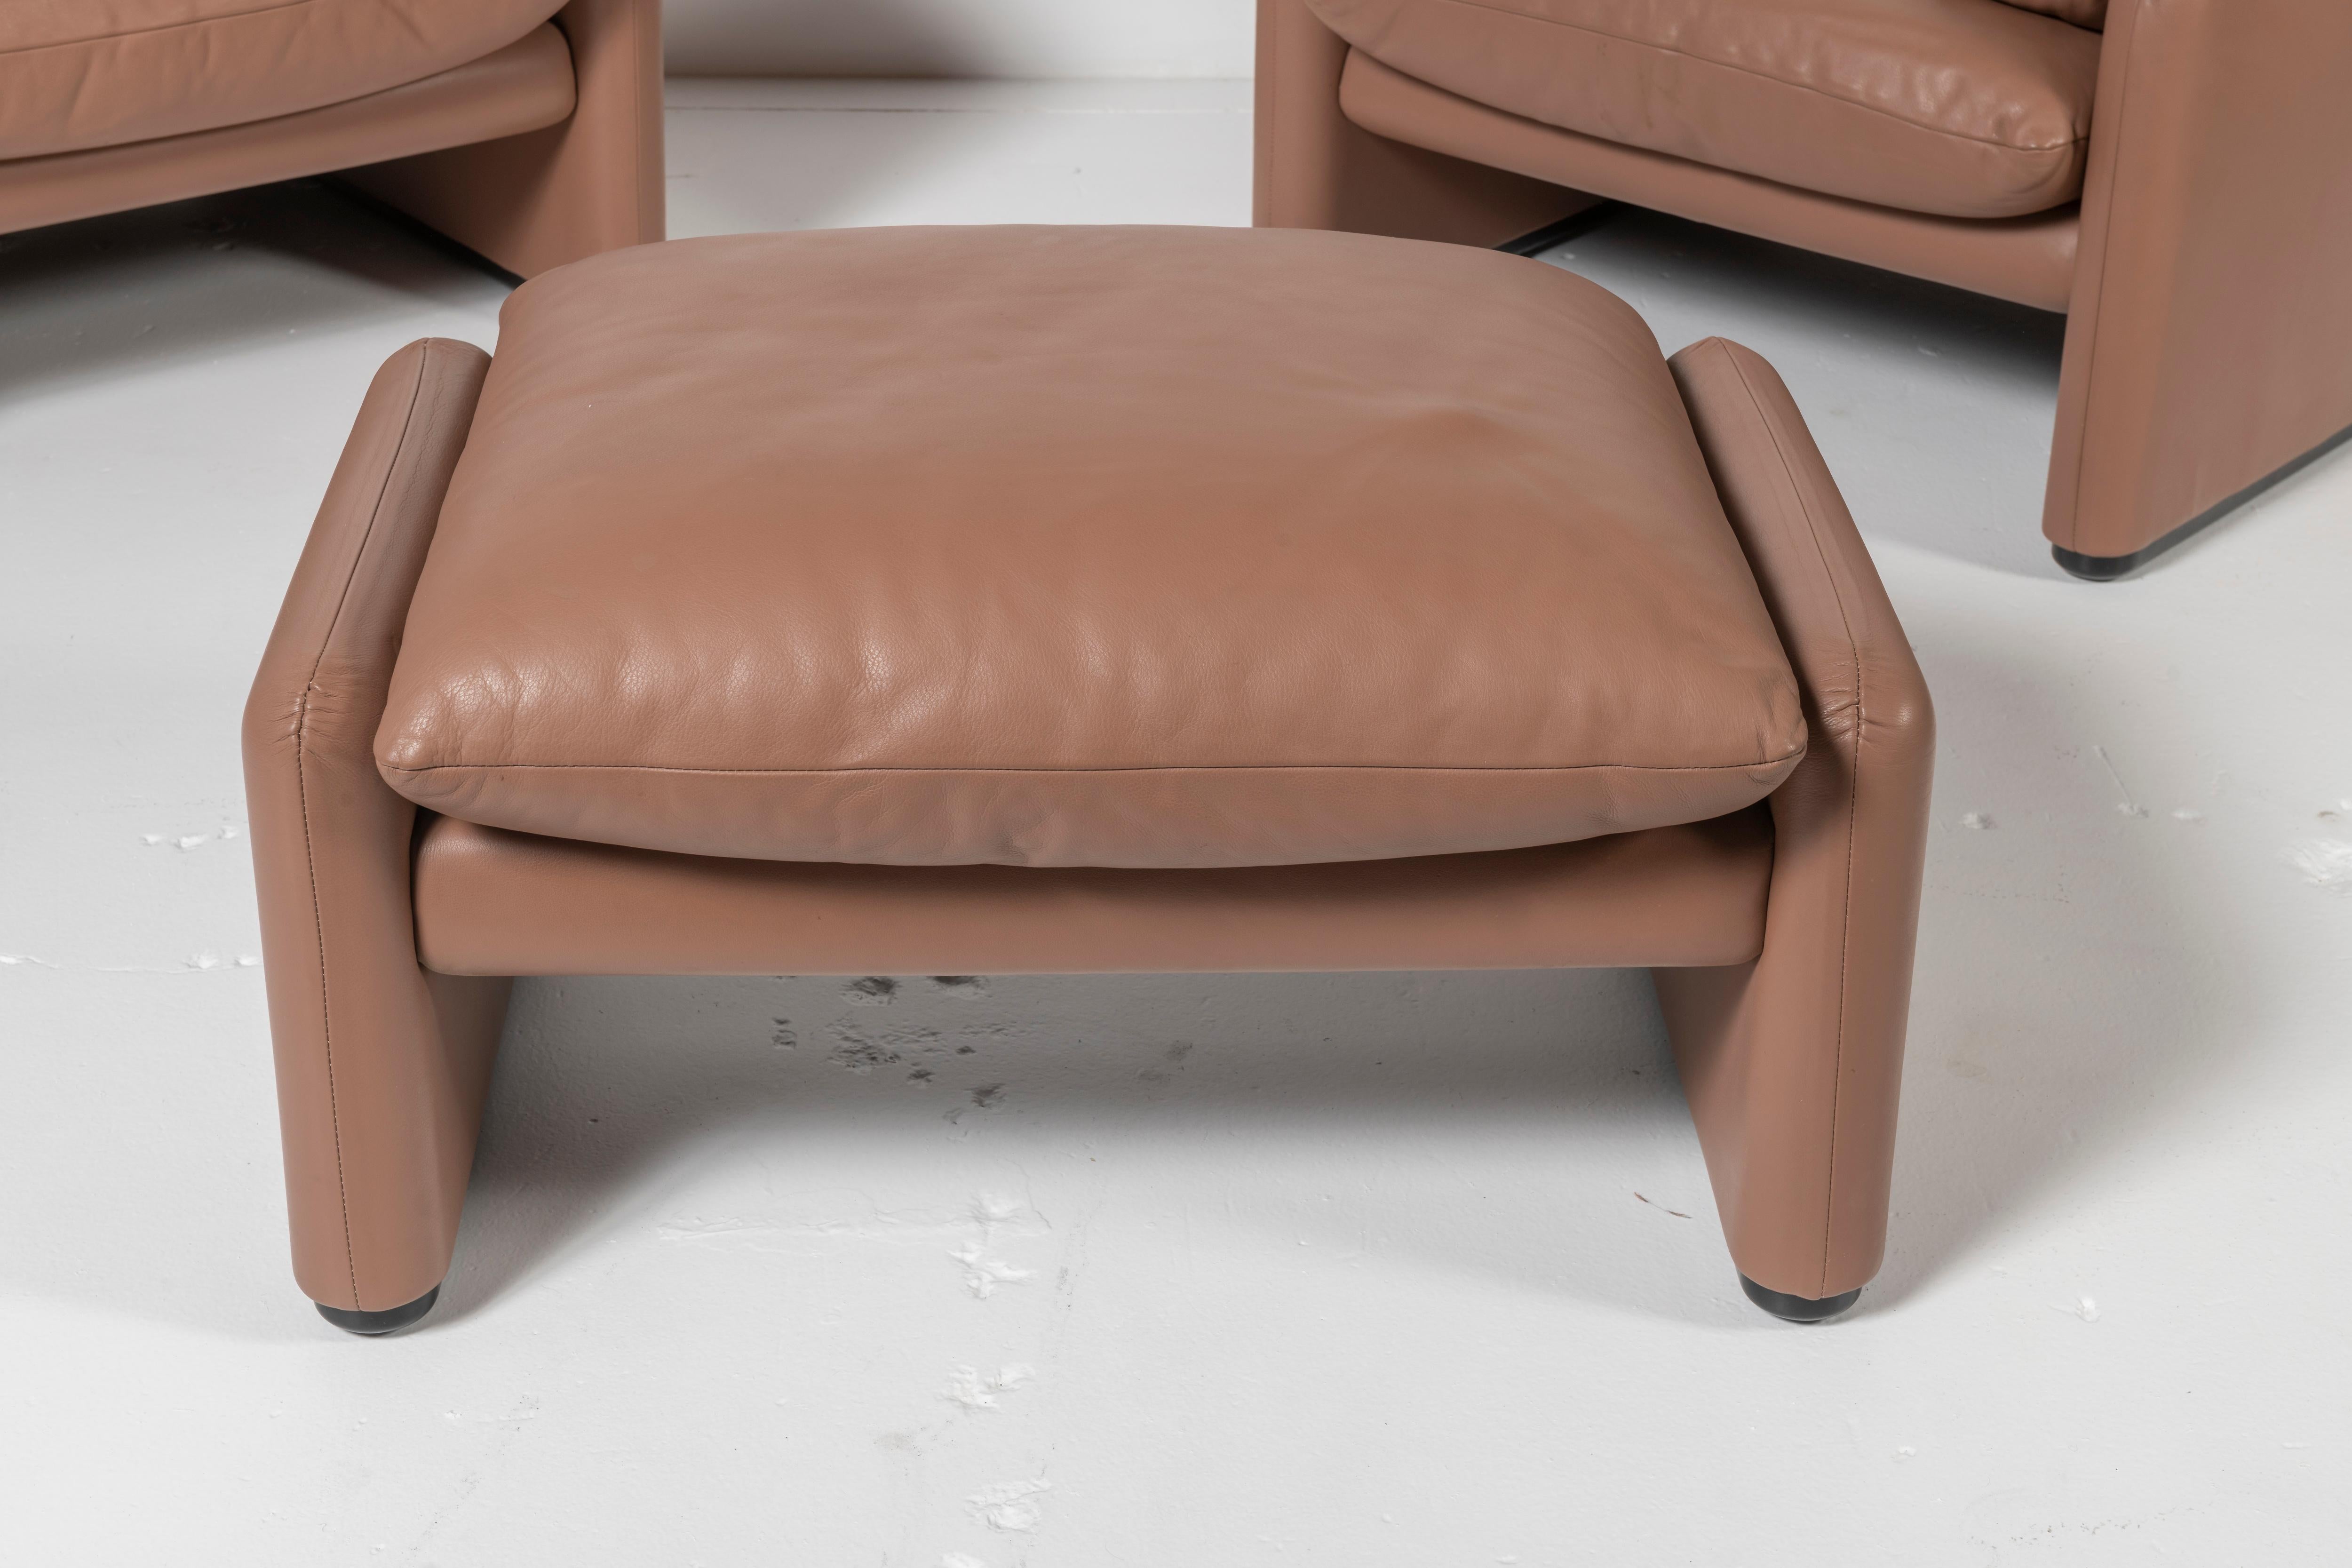 Super comfortable pair of Maralunga lounge chairs with ottoman in an unusual shade of tan leather. The chairs have an adjustable headrest and were designed by Vico Magistretti for Cassina. Ottoman completes the set. Lovely patina on the leather.